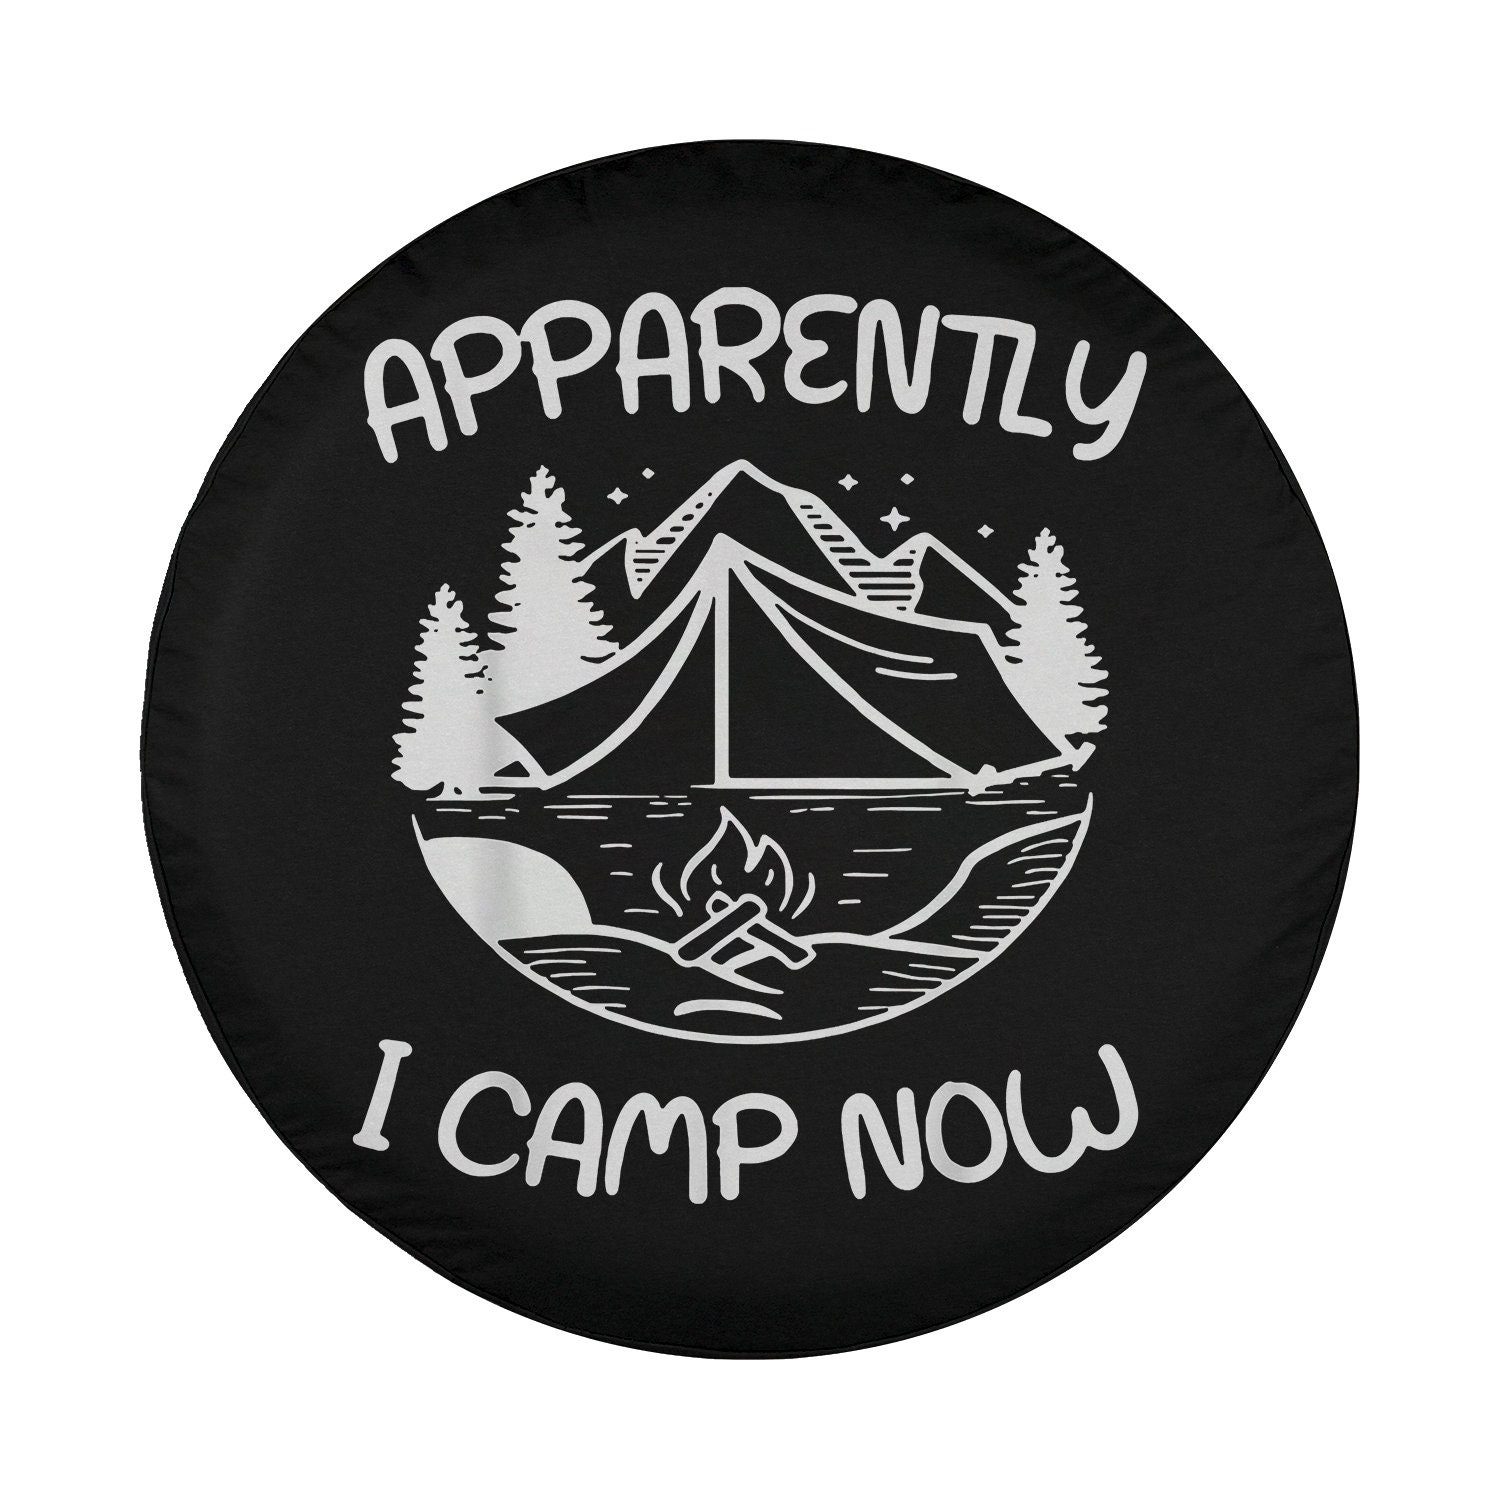 Funny Camping Gifts Apparently I Camp Now Spare Tire Cover Designed  Sold  By Substantial Bossk Rose